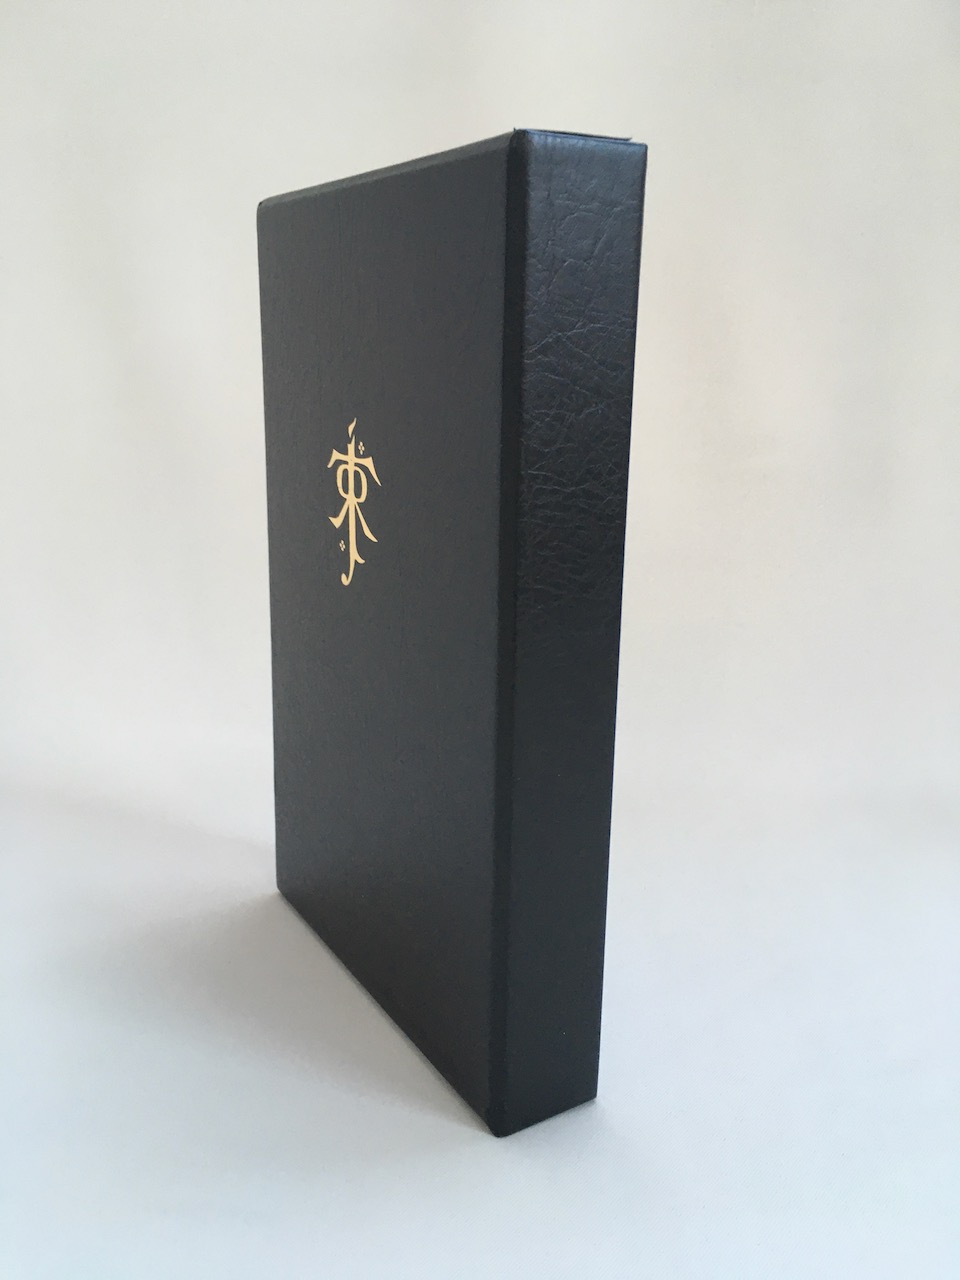 Lord of the Rings, Harper Collins Deluxe Limited Edition of 2001 - Black Leather 4